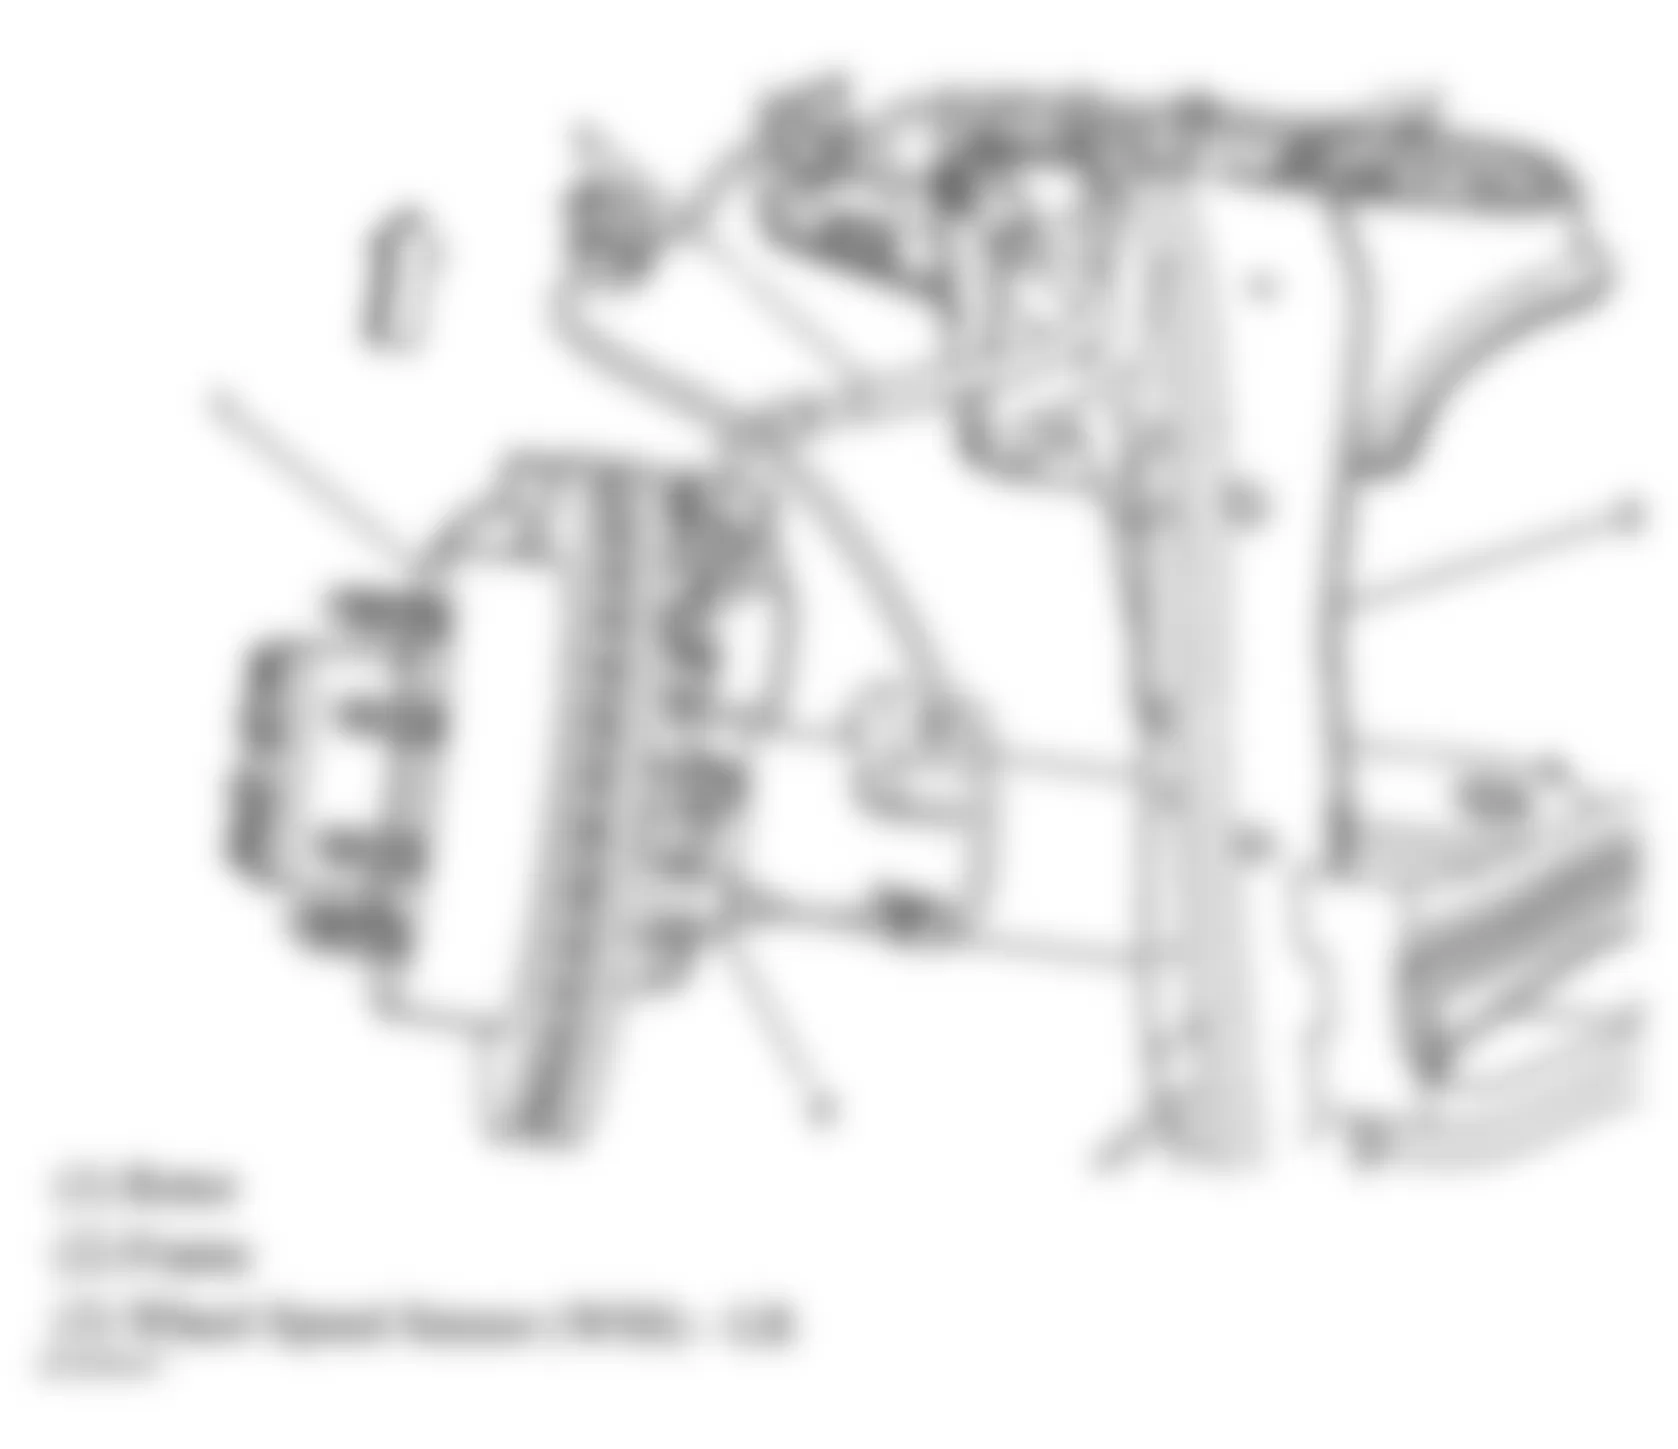 GMC Savana Special G3500 2004 - Component Locations -  Left Side Of Rear Axle